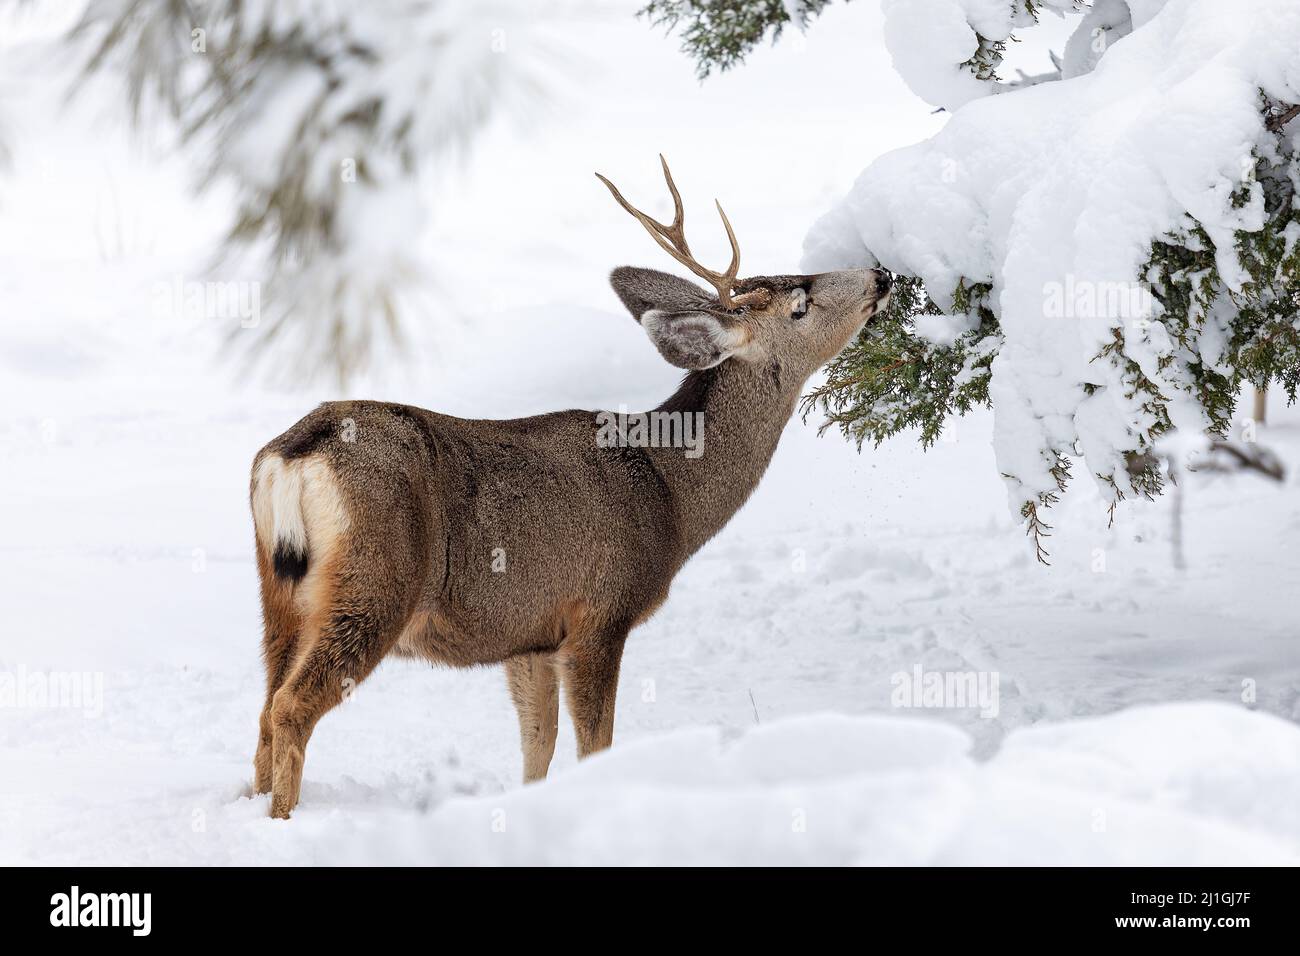 A Mule Deer Buck eating from a tree in a forest with winter snow in Grand Canyon National Park, Arizona Stock Photo